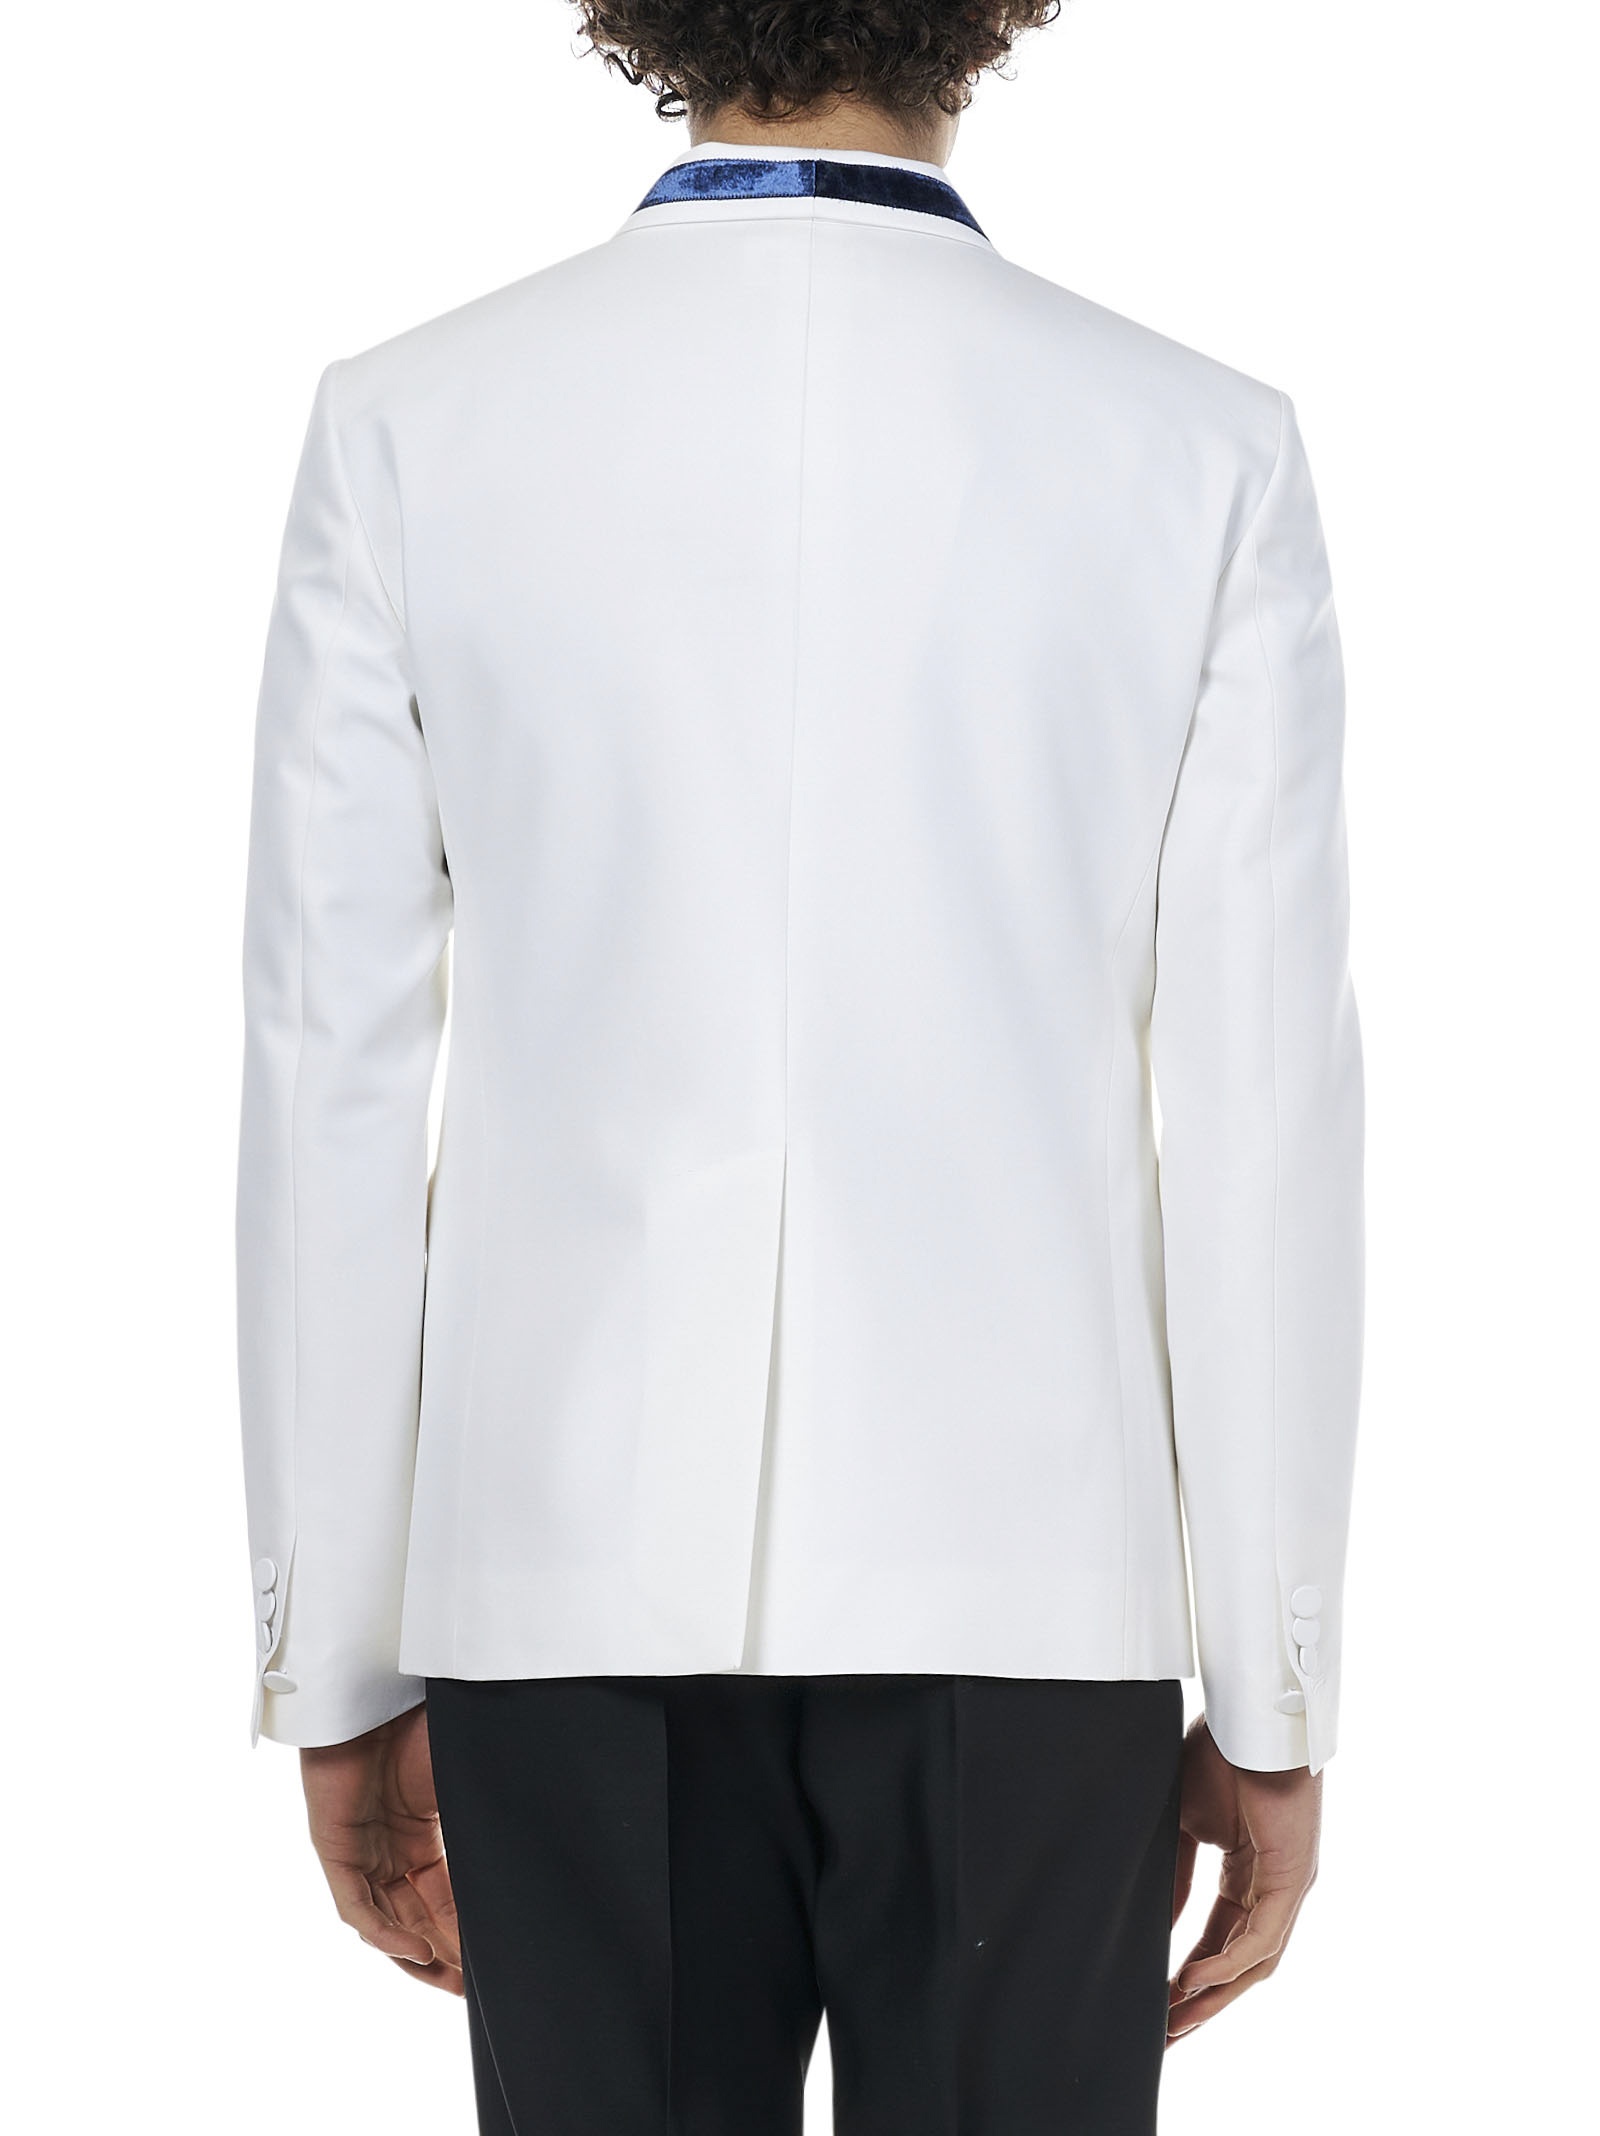 Tokyo suit with black tailored trousers and single-breasted blazer in white crêpe with blue velvet i - 3